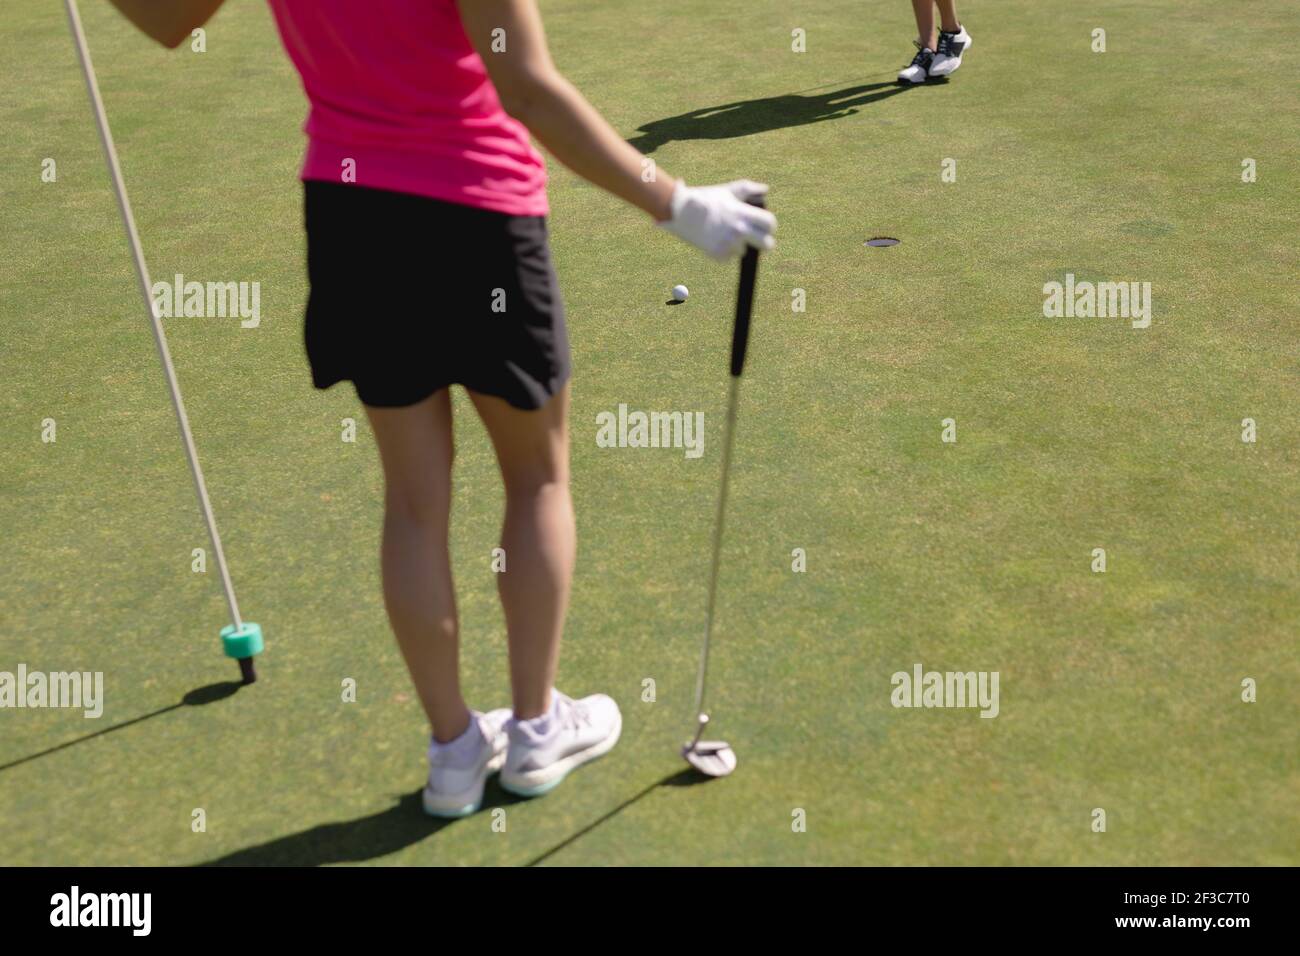 Caucasian woman playing golf holding club and flag while other player putts for the hole Stock Photo